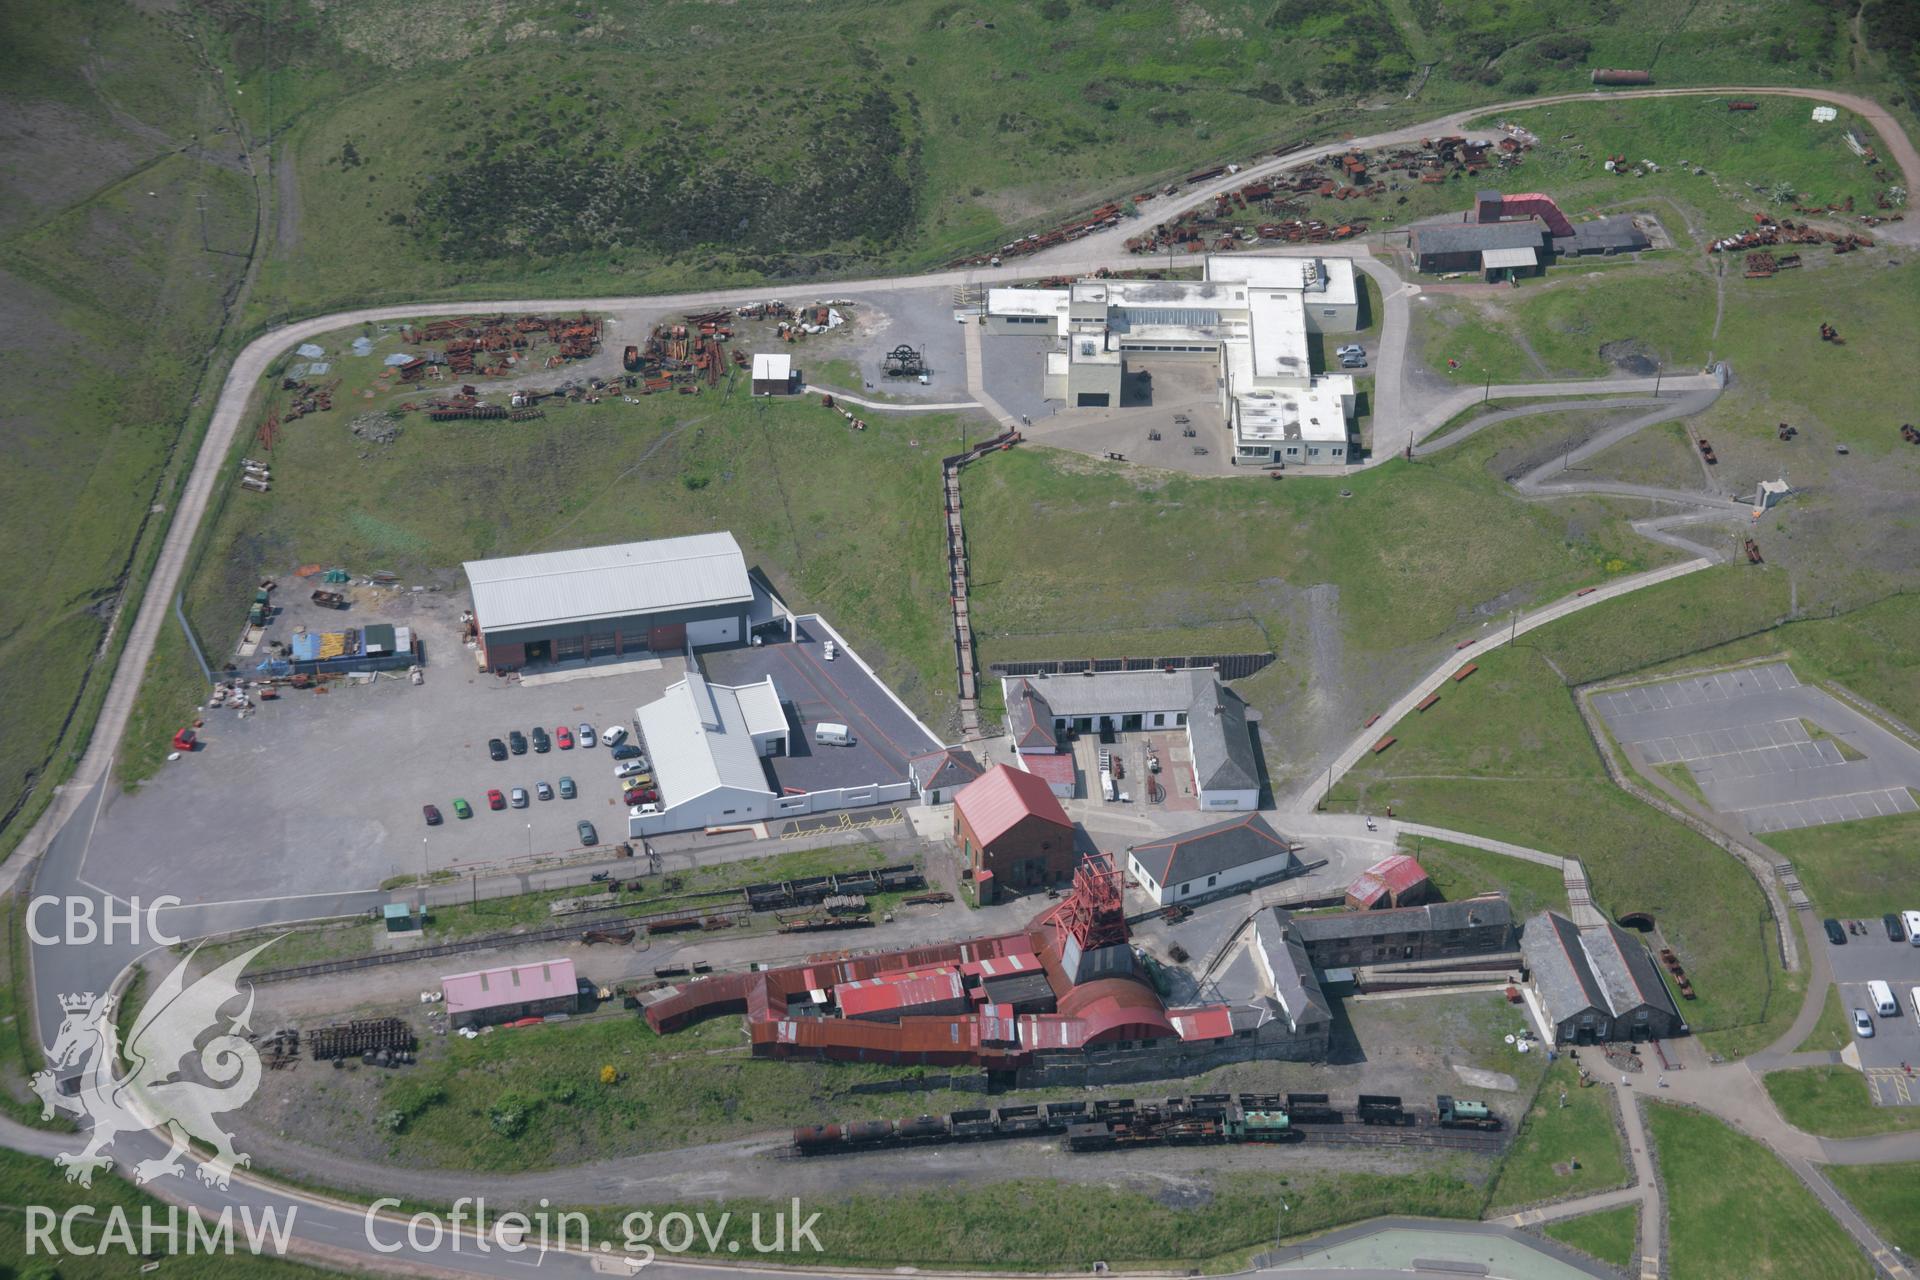 RCAHMW colour oblique aerial photograph of Big Pit Coal Mine, Blaenavon from the north-east. Taken on 09 June 2006 by Toby Driver.